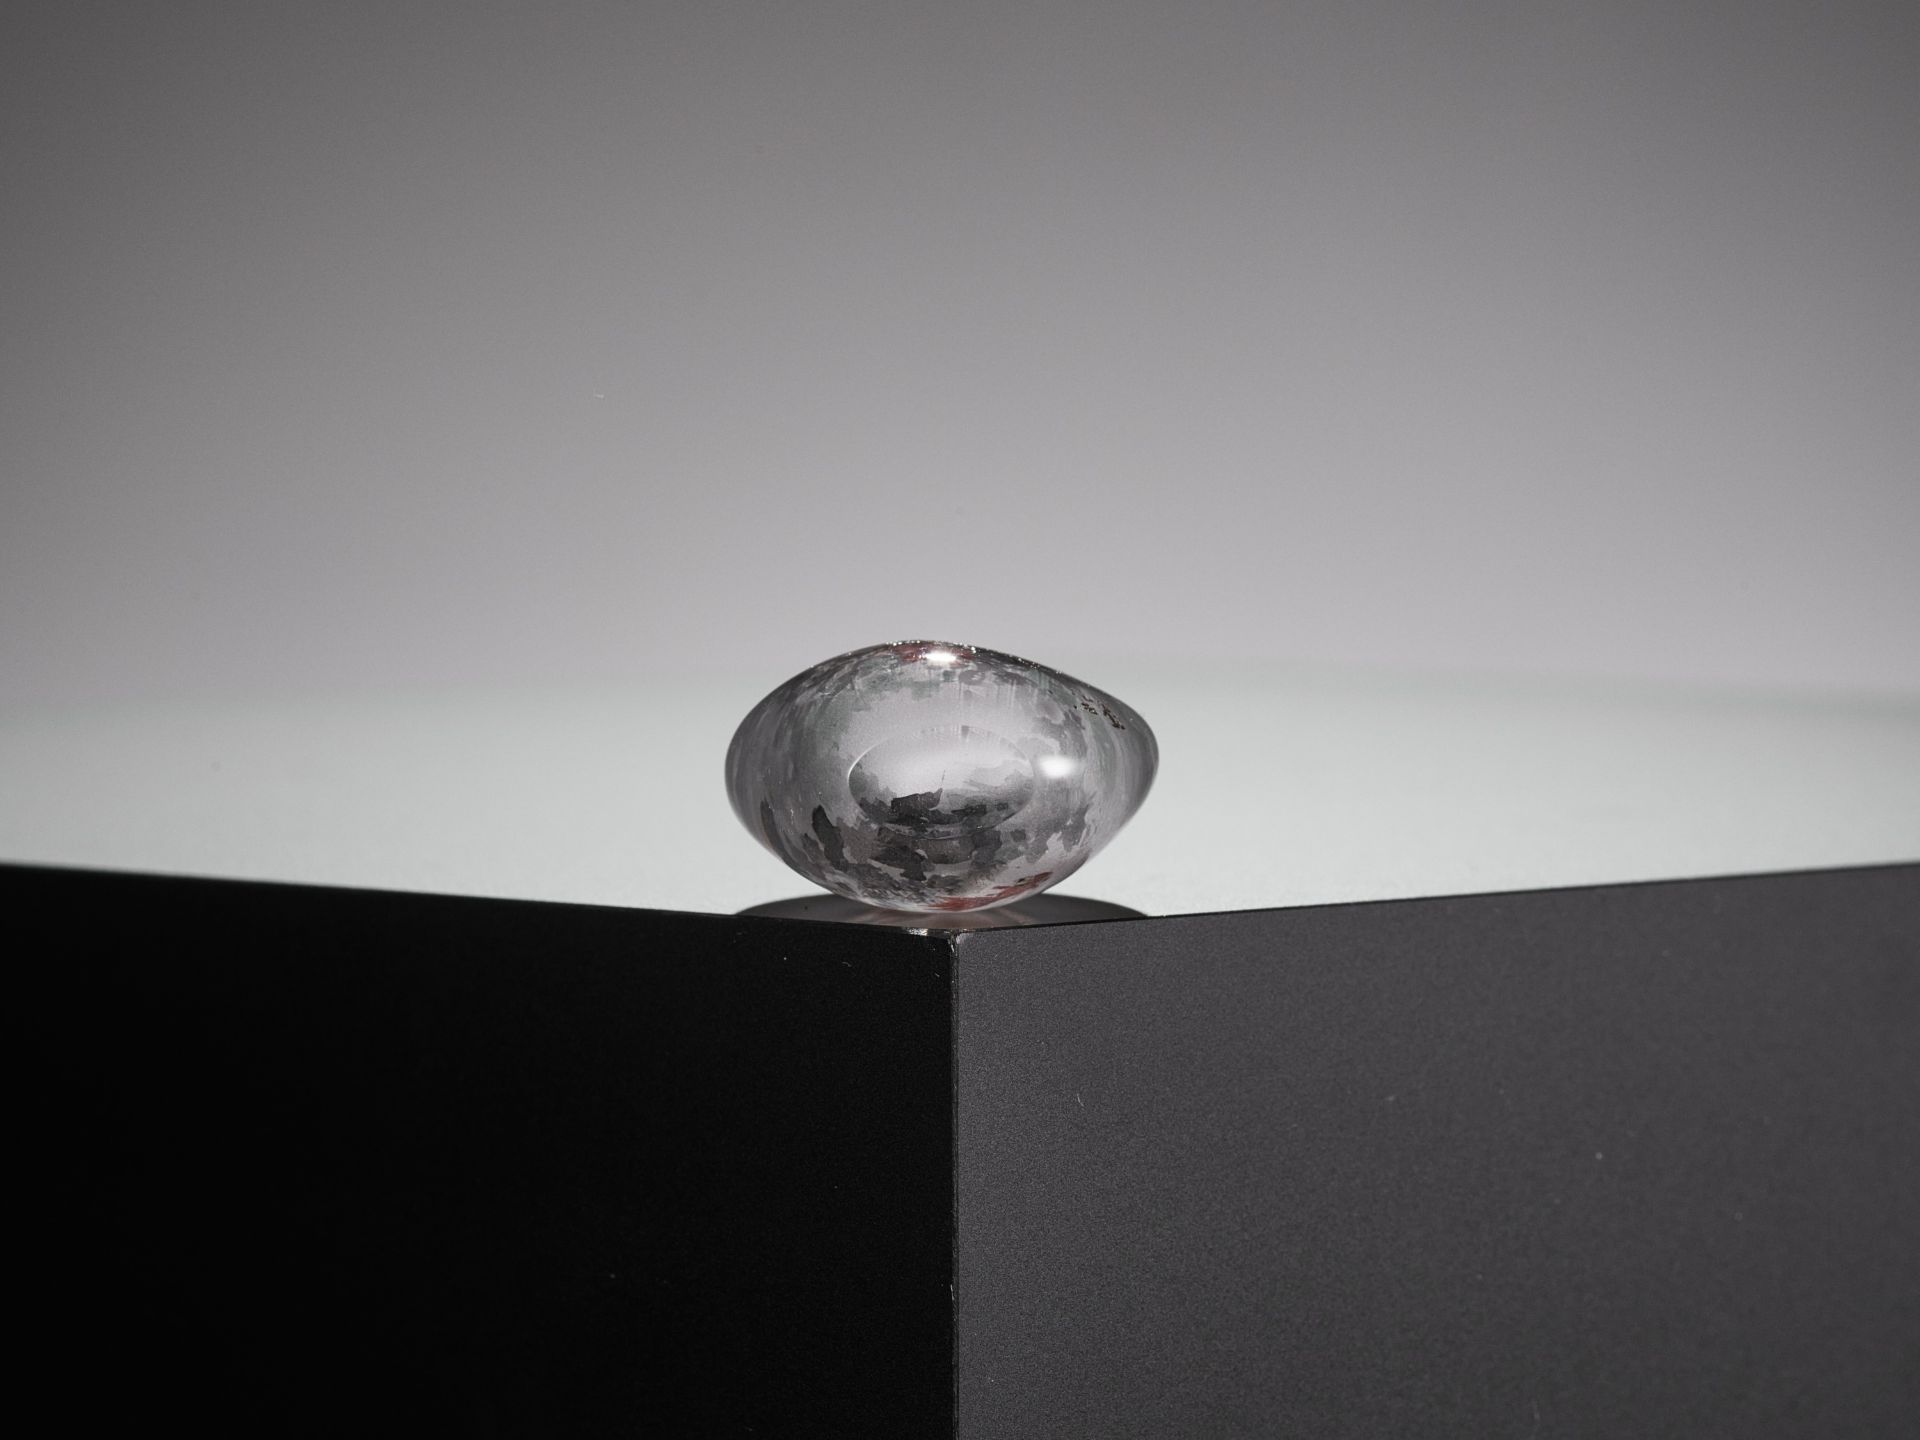 A MINIATURE INTERIOR-PAINTED ROCK CRYSTAL SNUFF BOTTLE, BY TIAN CHENG - Image 10 of 10